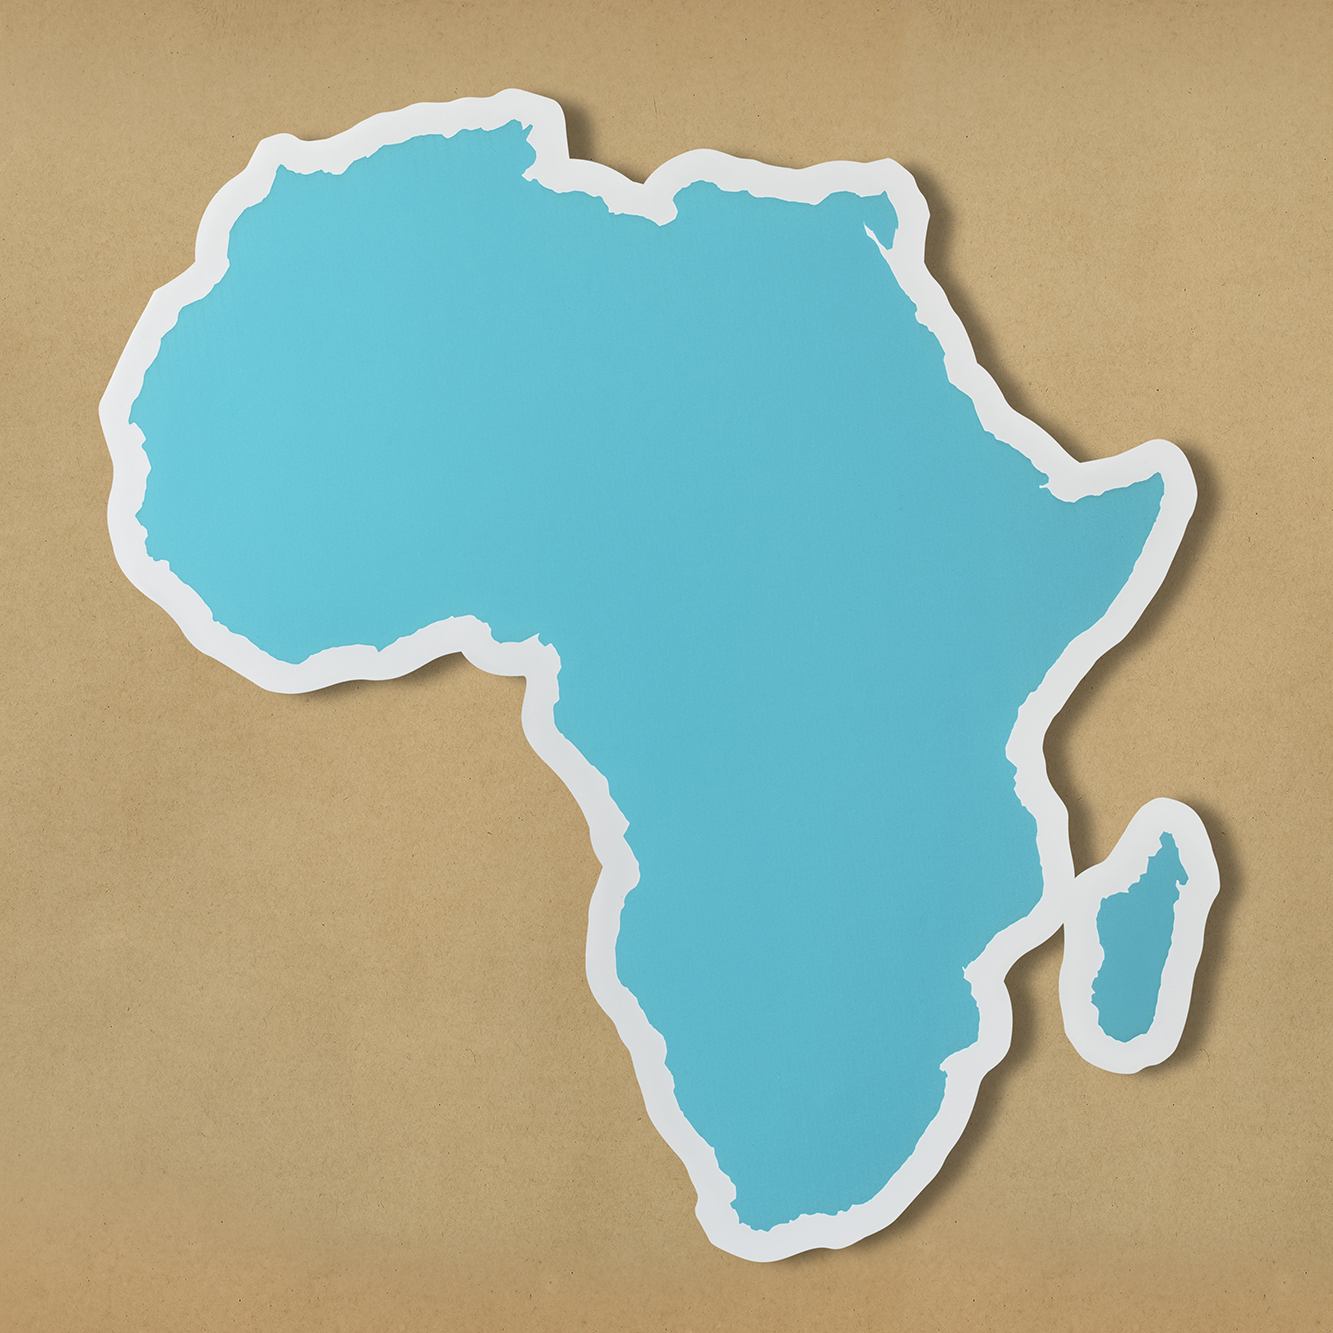 Intra-African trade: Africa on its way to become the largest trade bloc in the world